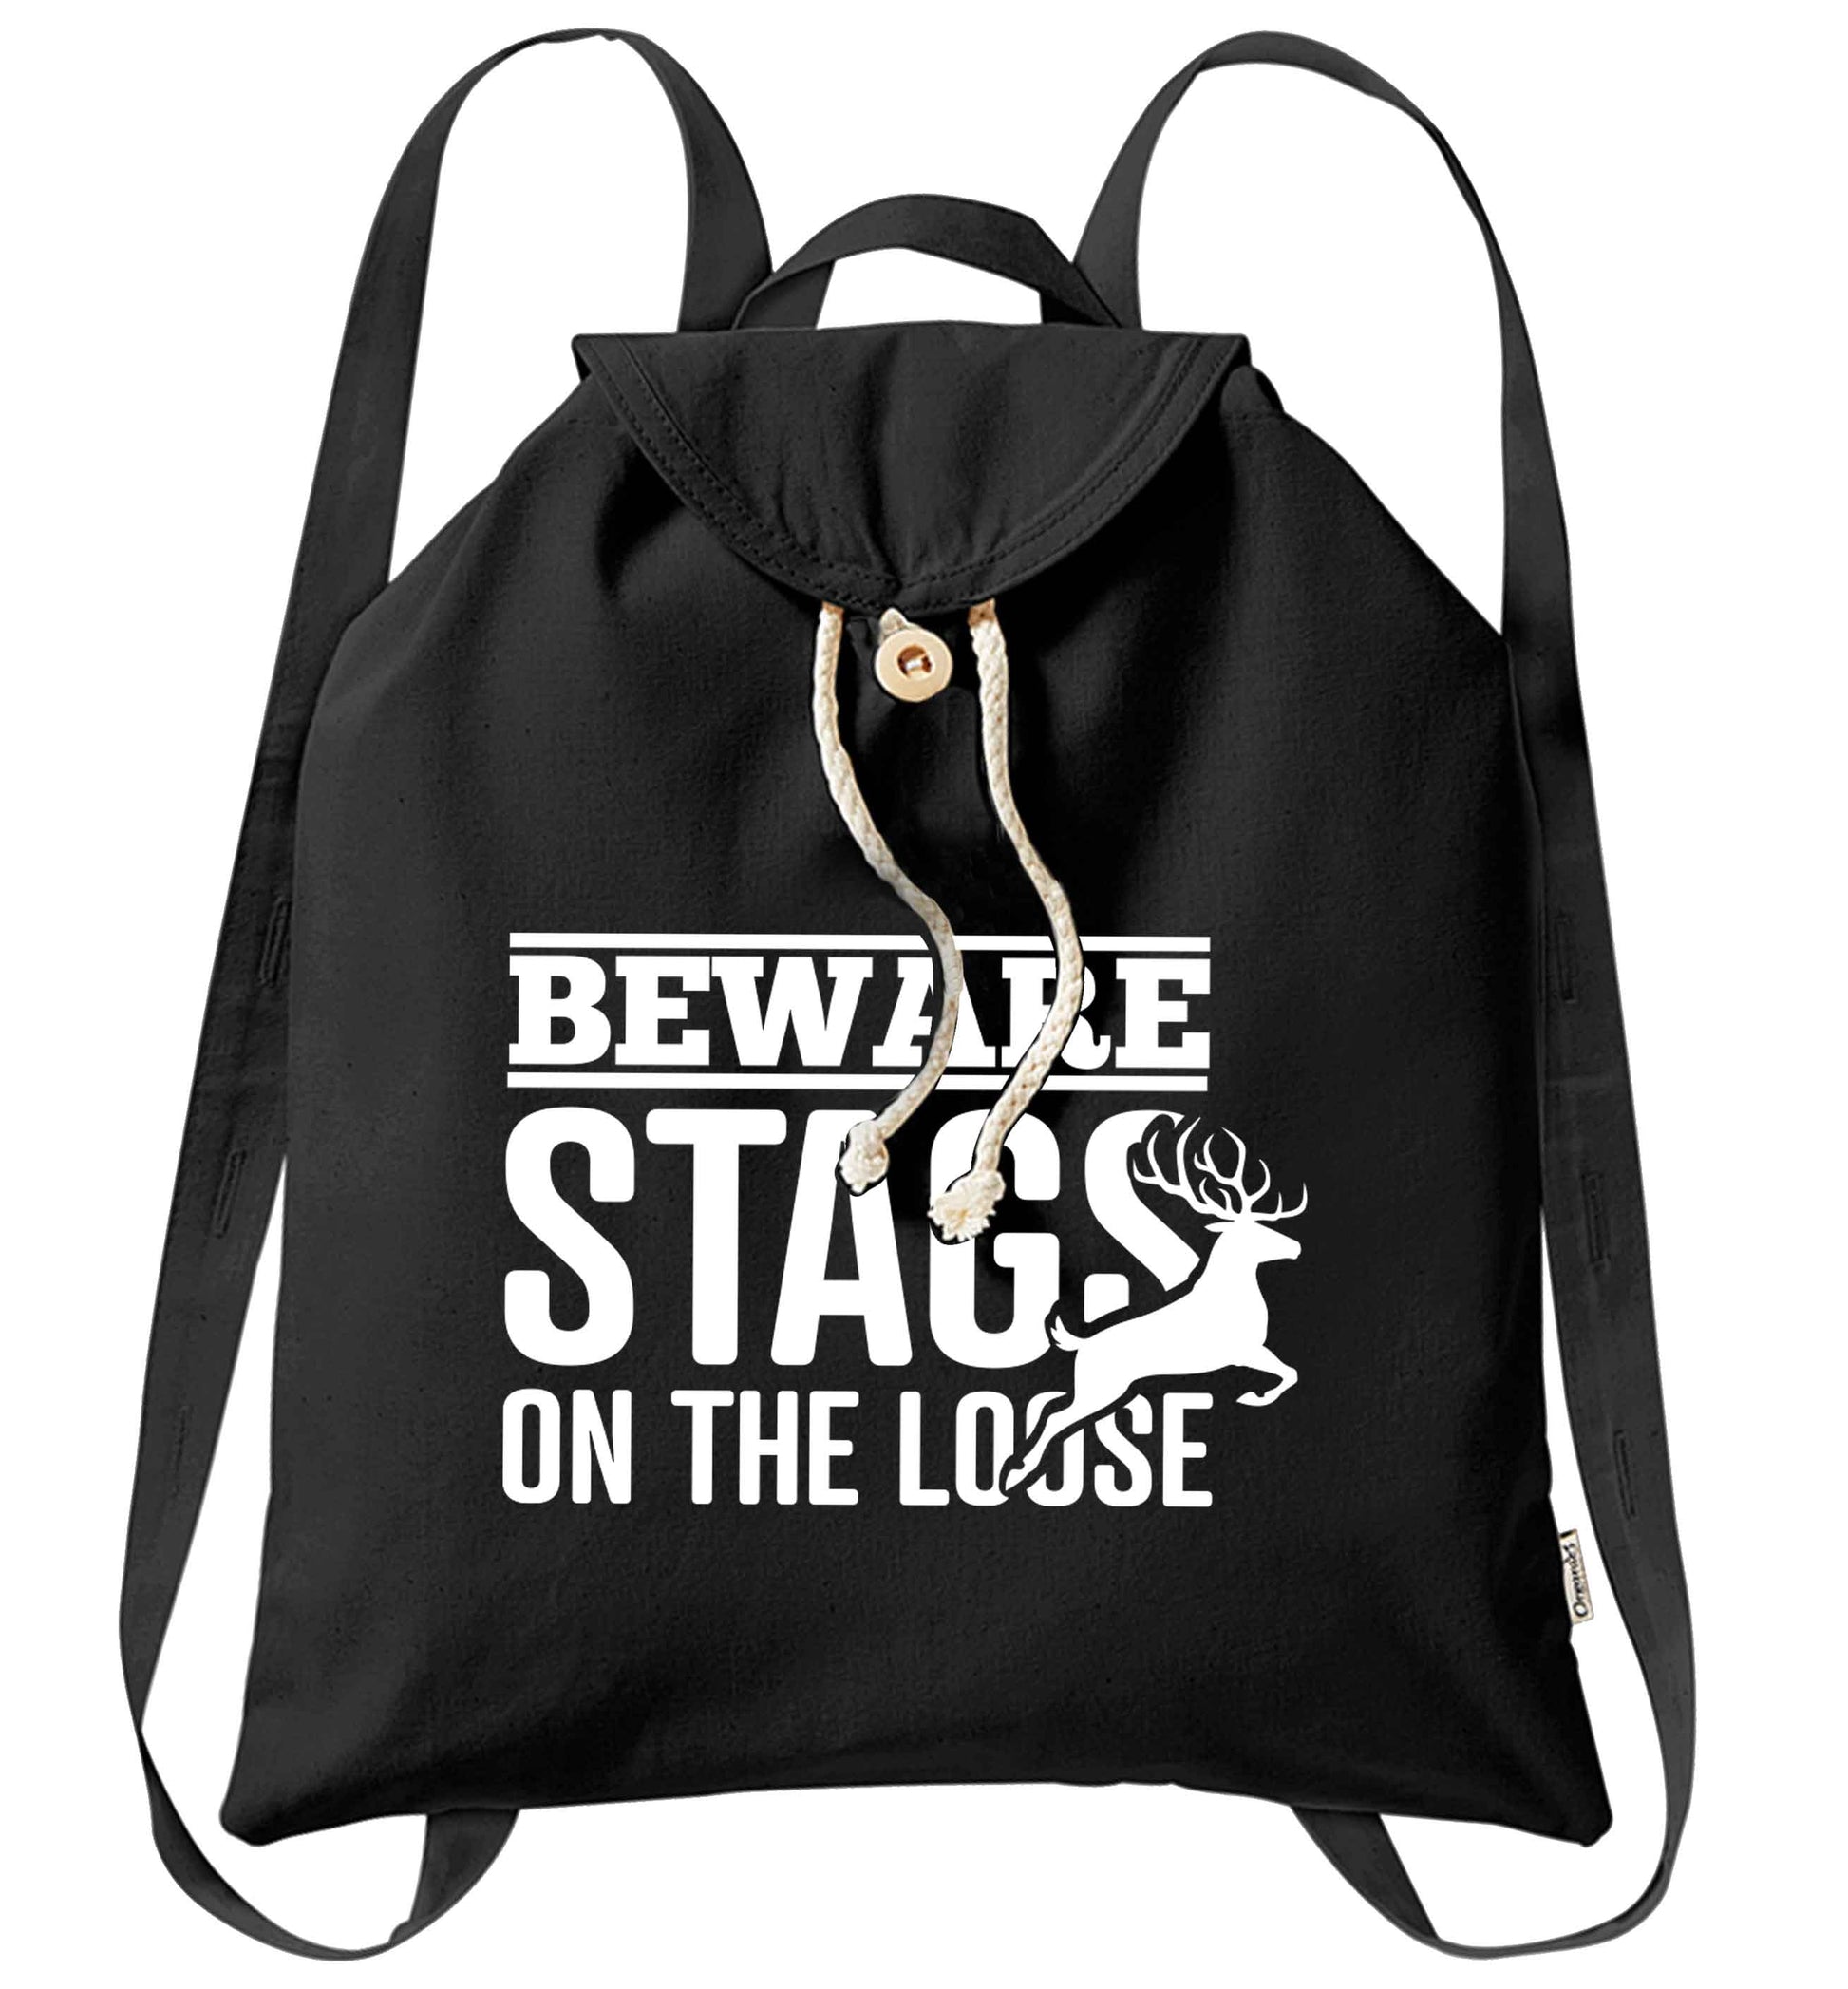 Beware stags on the loose organic cotton backpack tote with wooden buttons in black